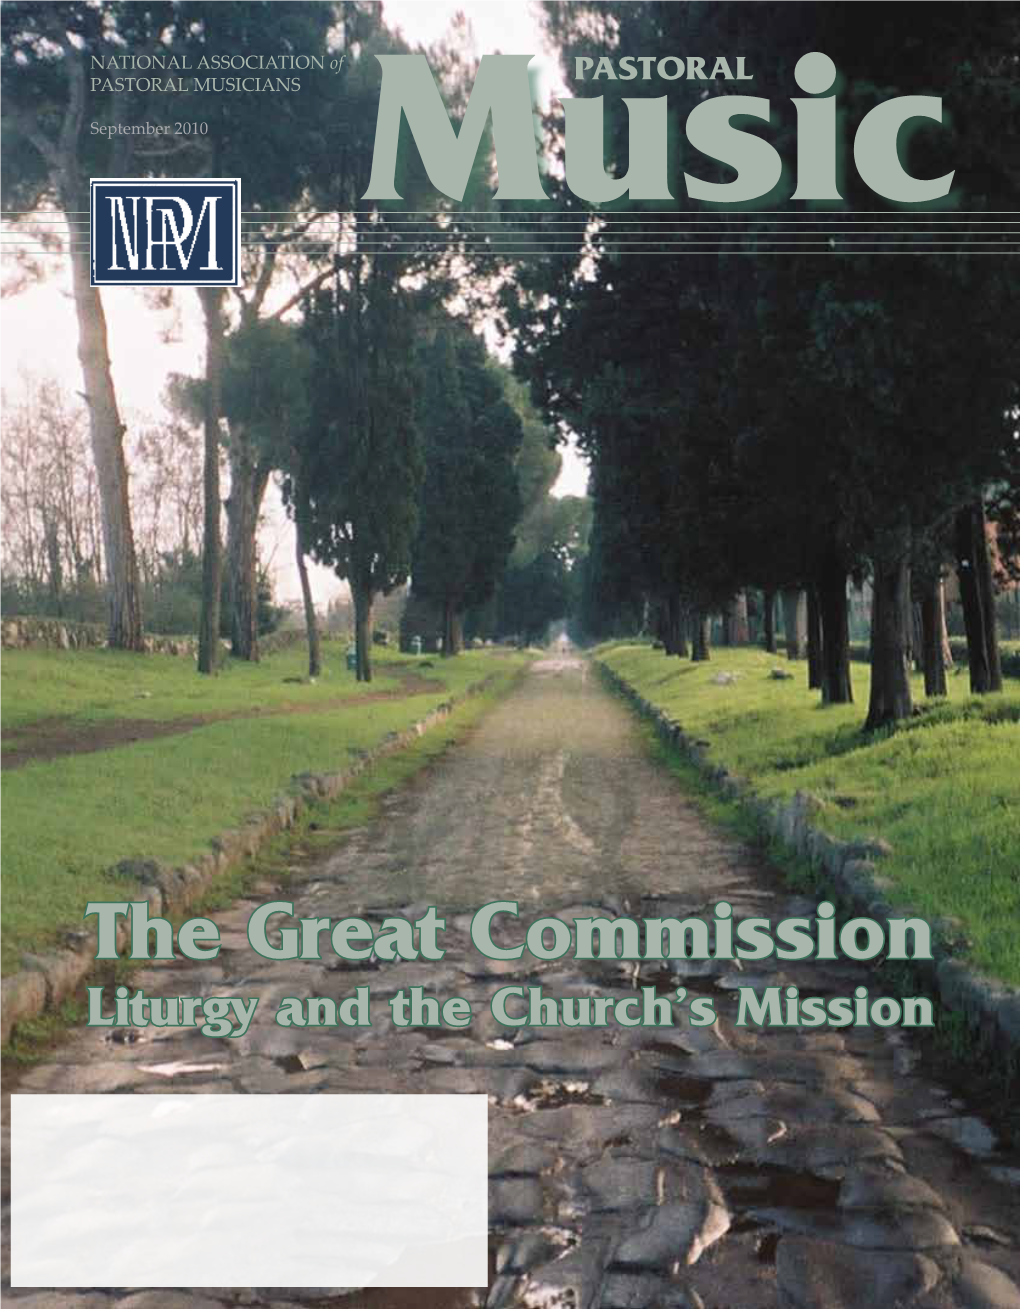 The Great Commission: Liturgy and the Church's Mission